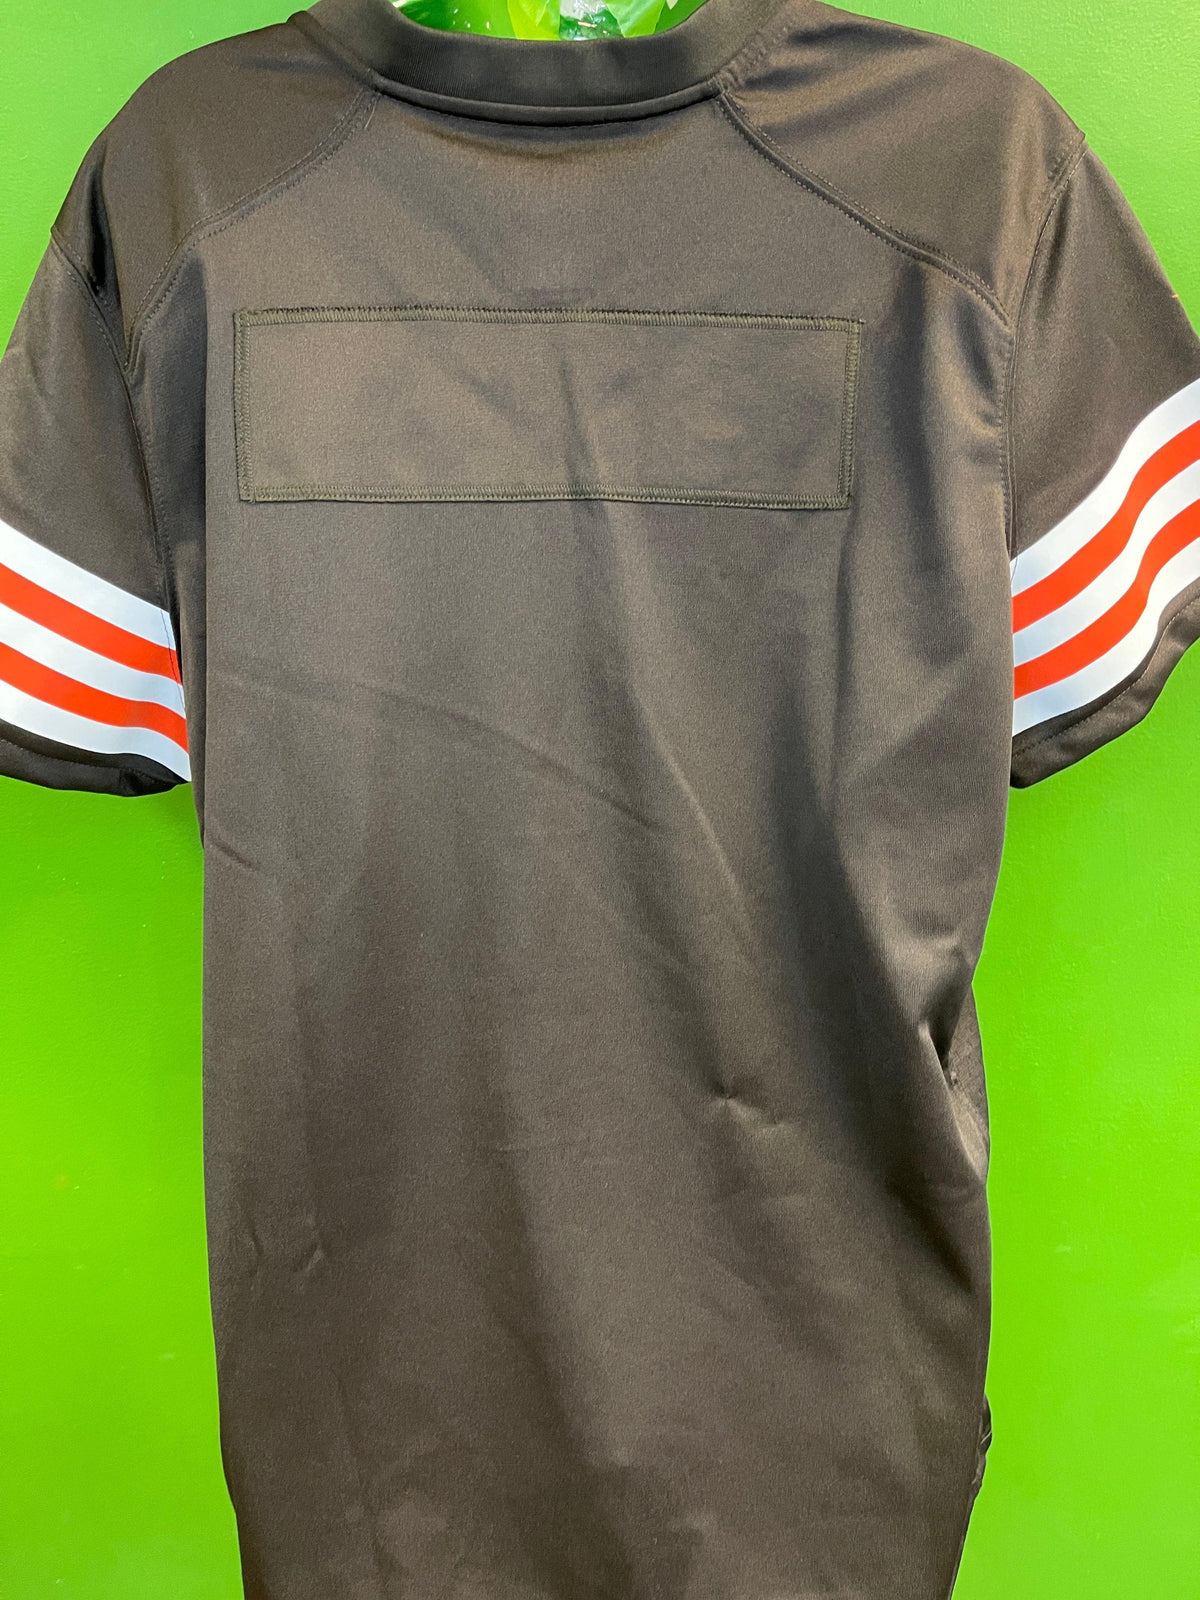 NFL Cleveland Browns Plain Blank Game Jersey Women's X-Large NWT